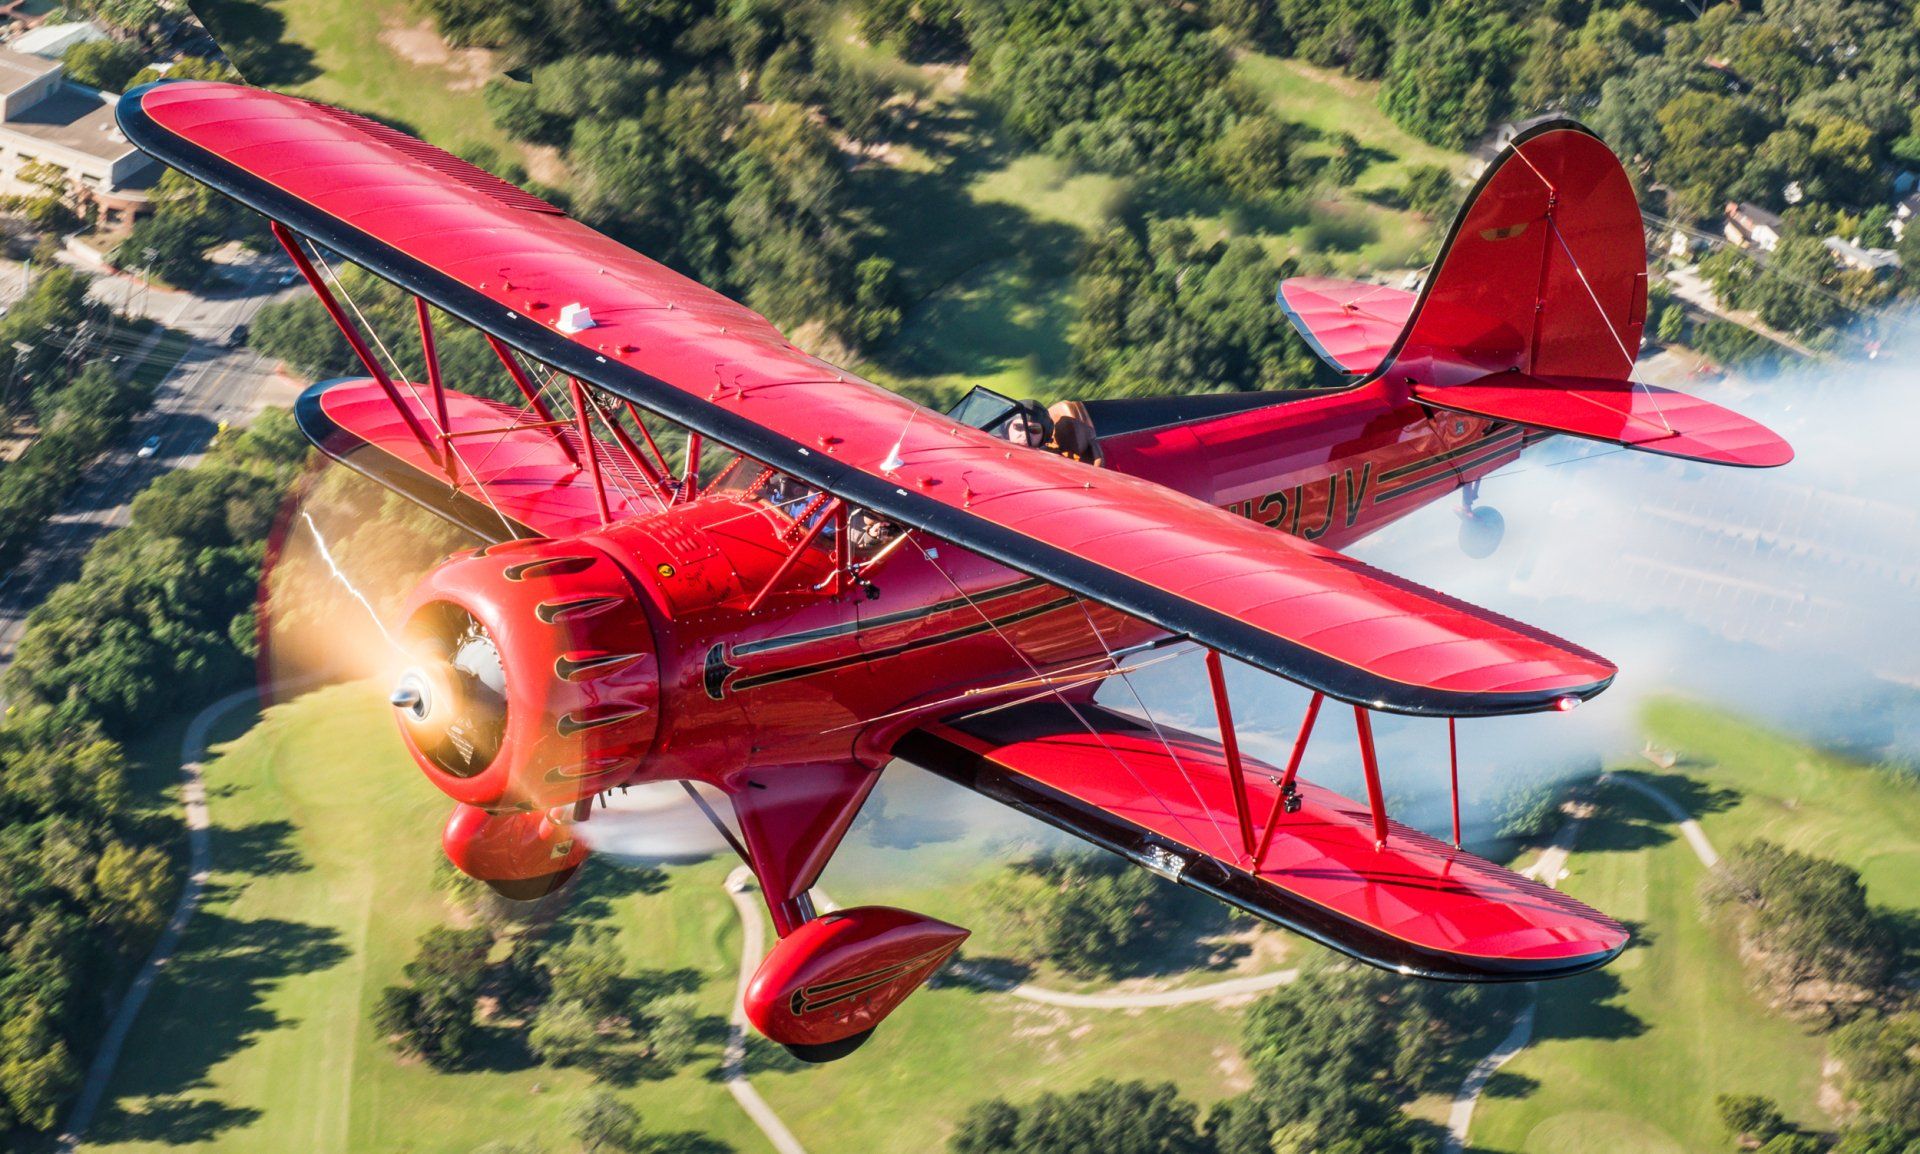 Red WACO biplane flying over a field